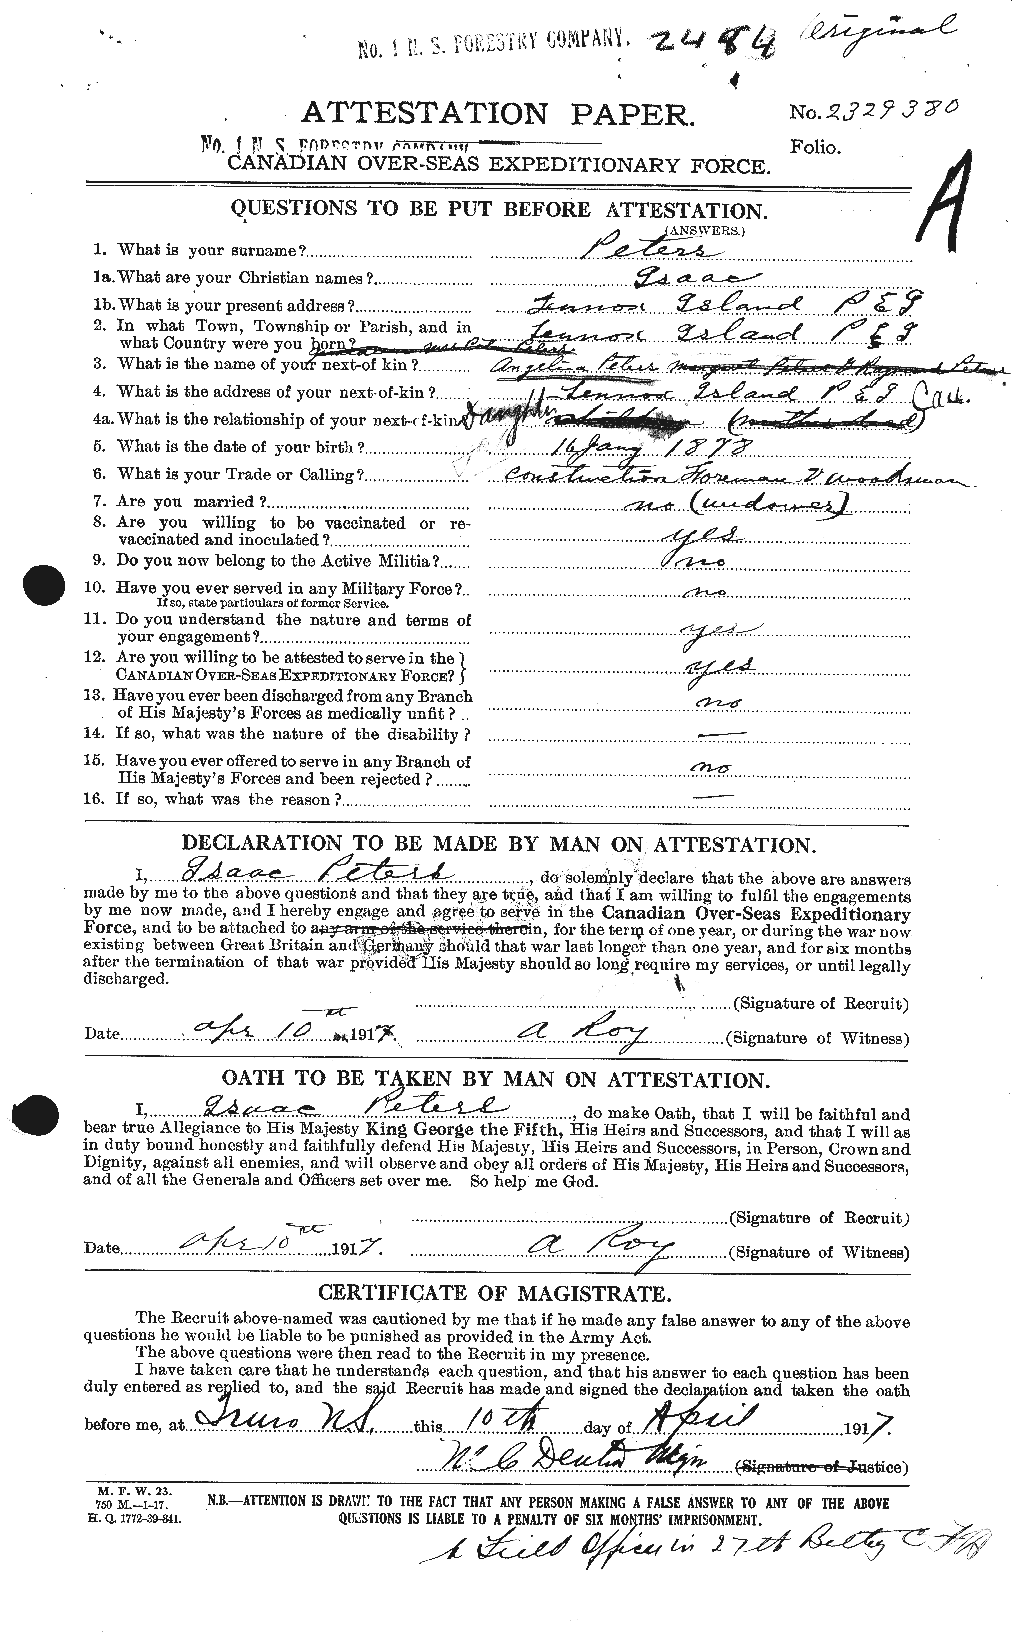 Personnel Records of the First World War - CEF 575509a